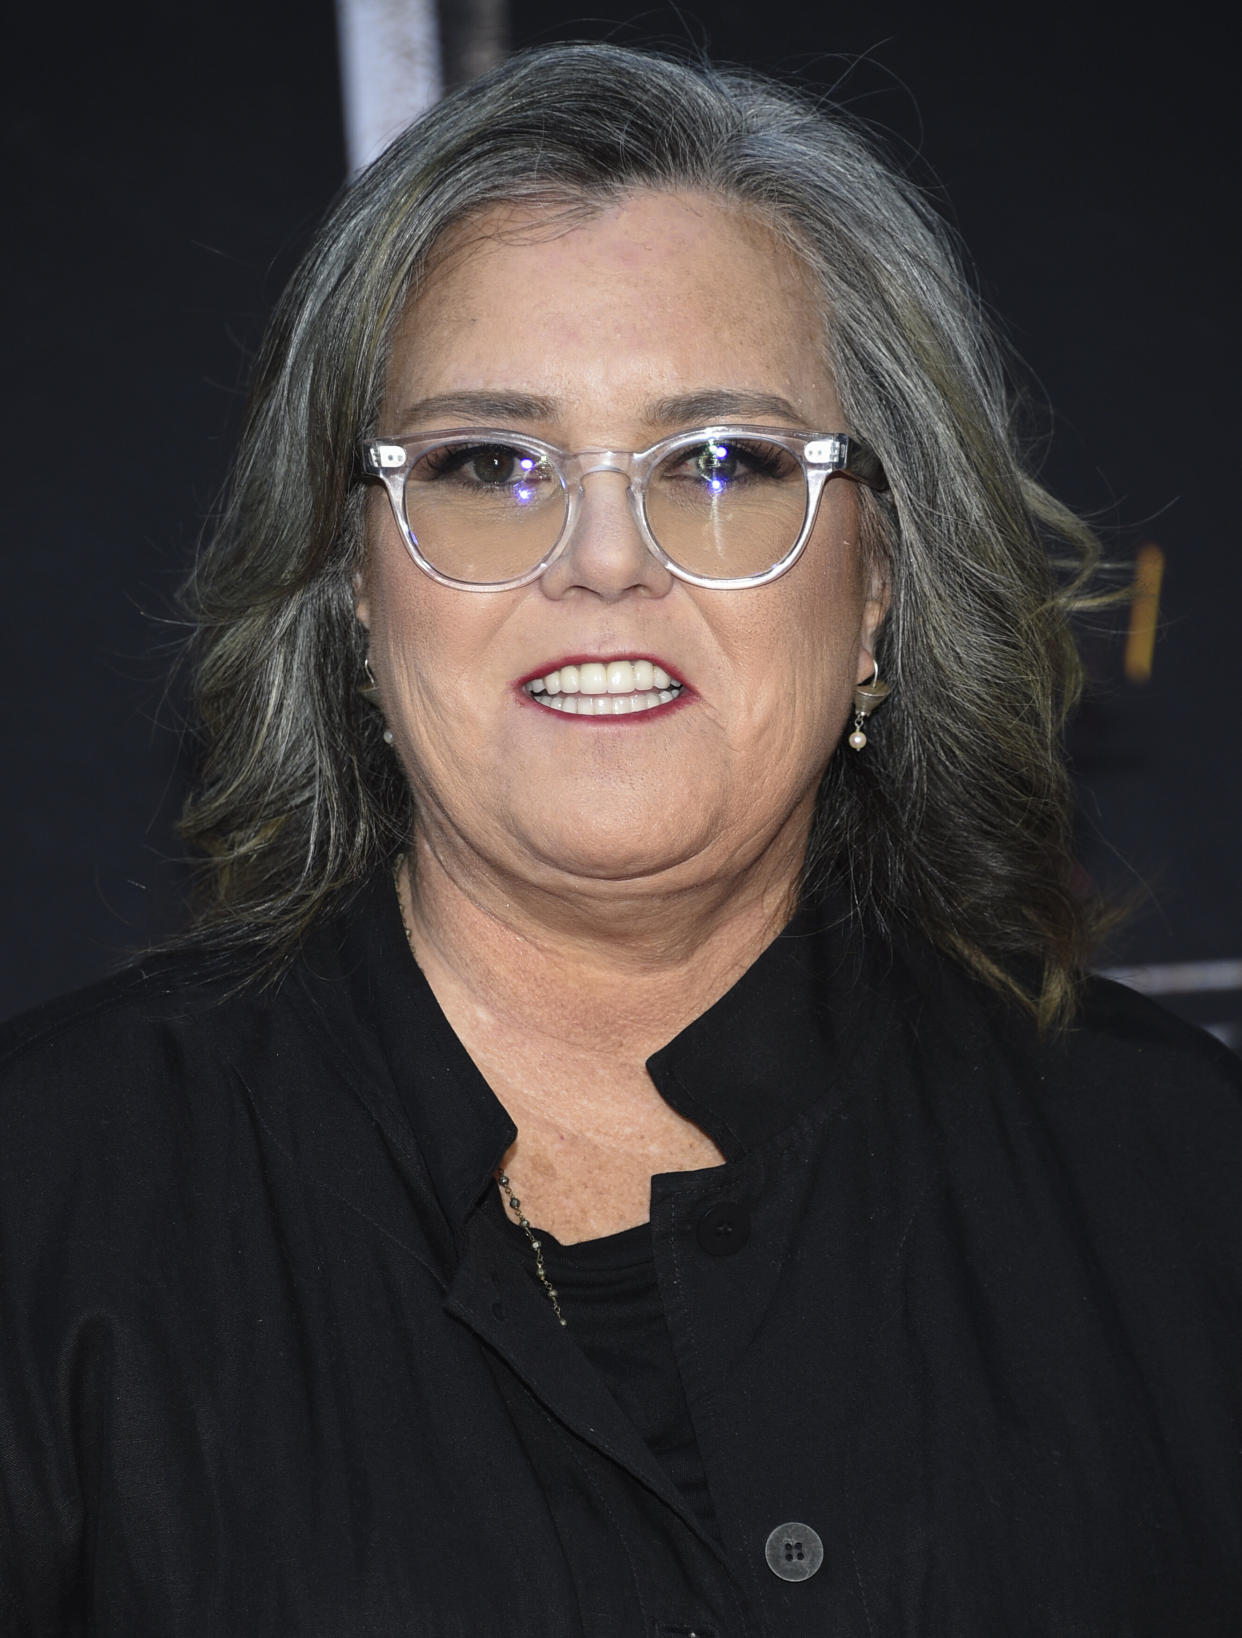 Actress Rosie O'Donnell attends HBO's "Game of Thrones" final season premiere at Radio City Music Hall on Wednesday, April 3, 2019, in New York. (Photo by Evan Agostini/Invision/AP)